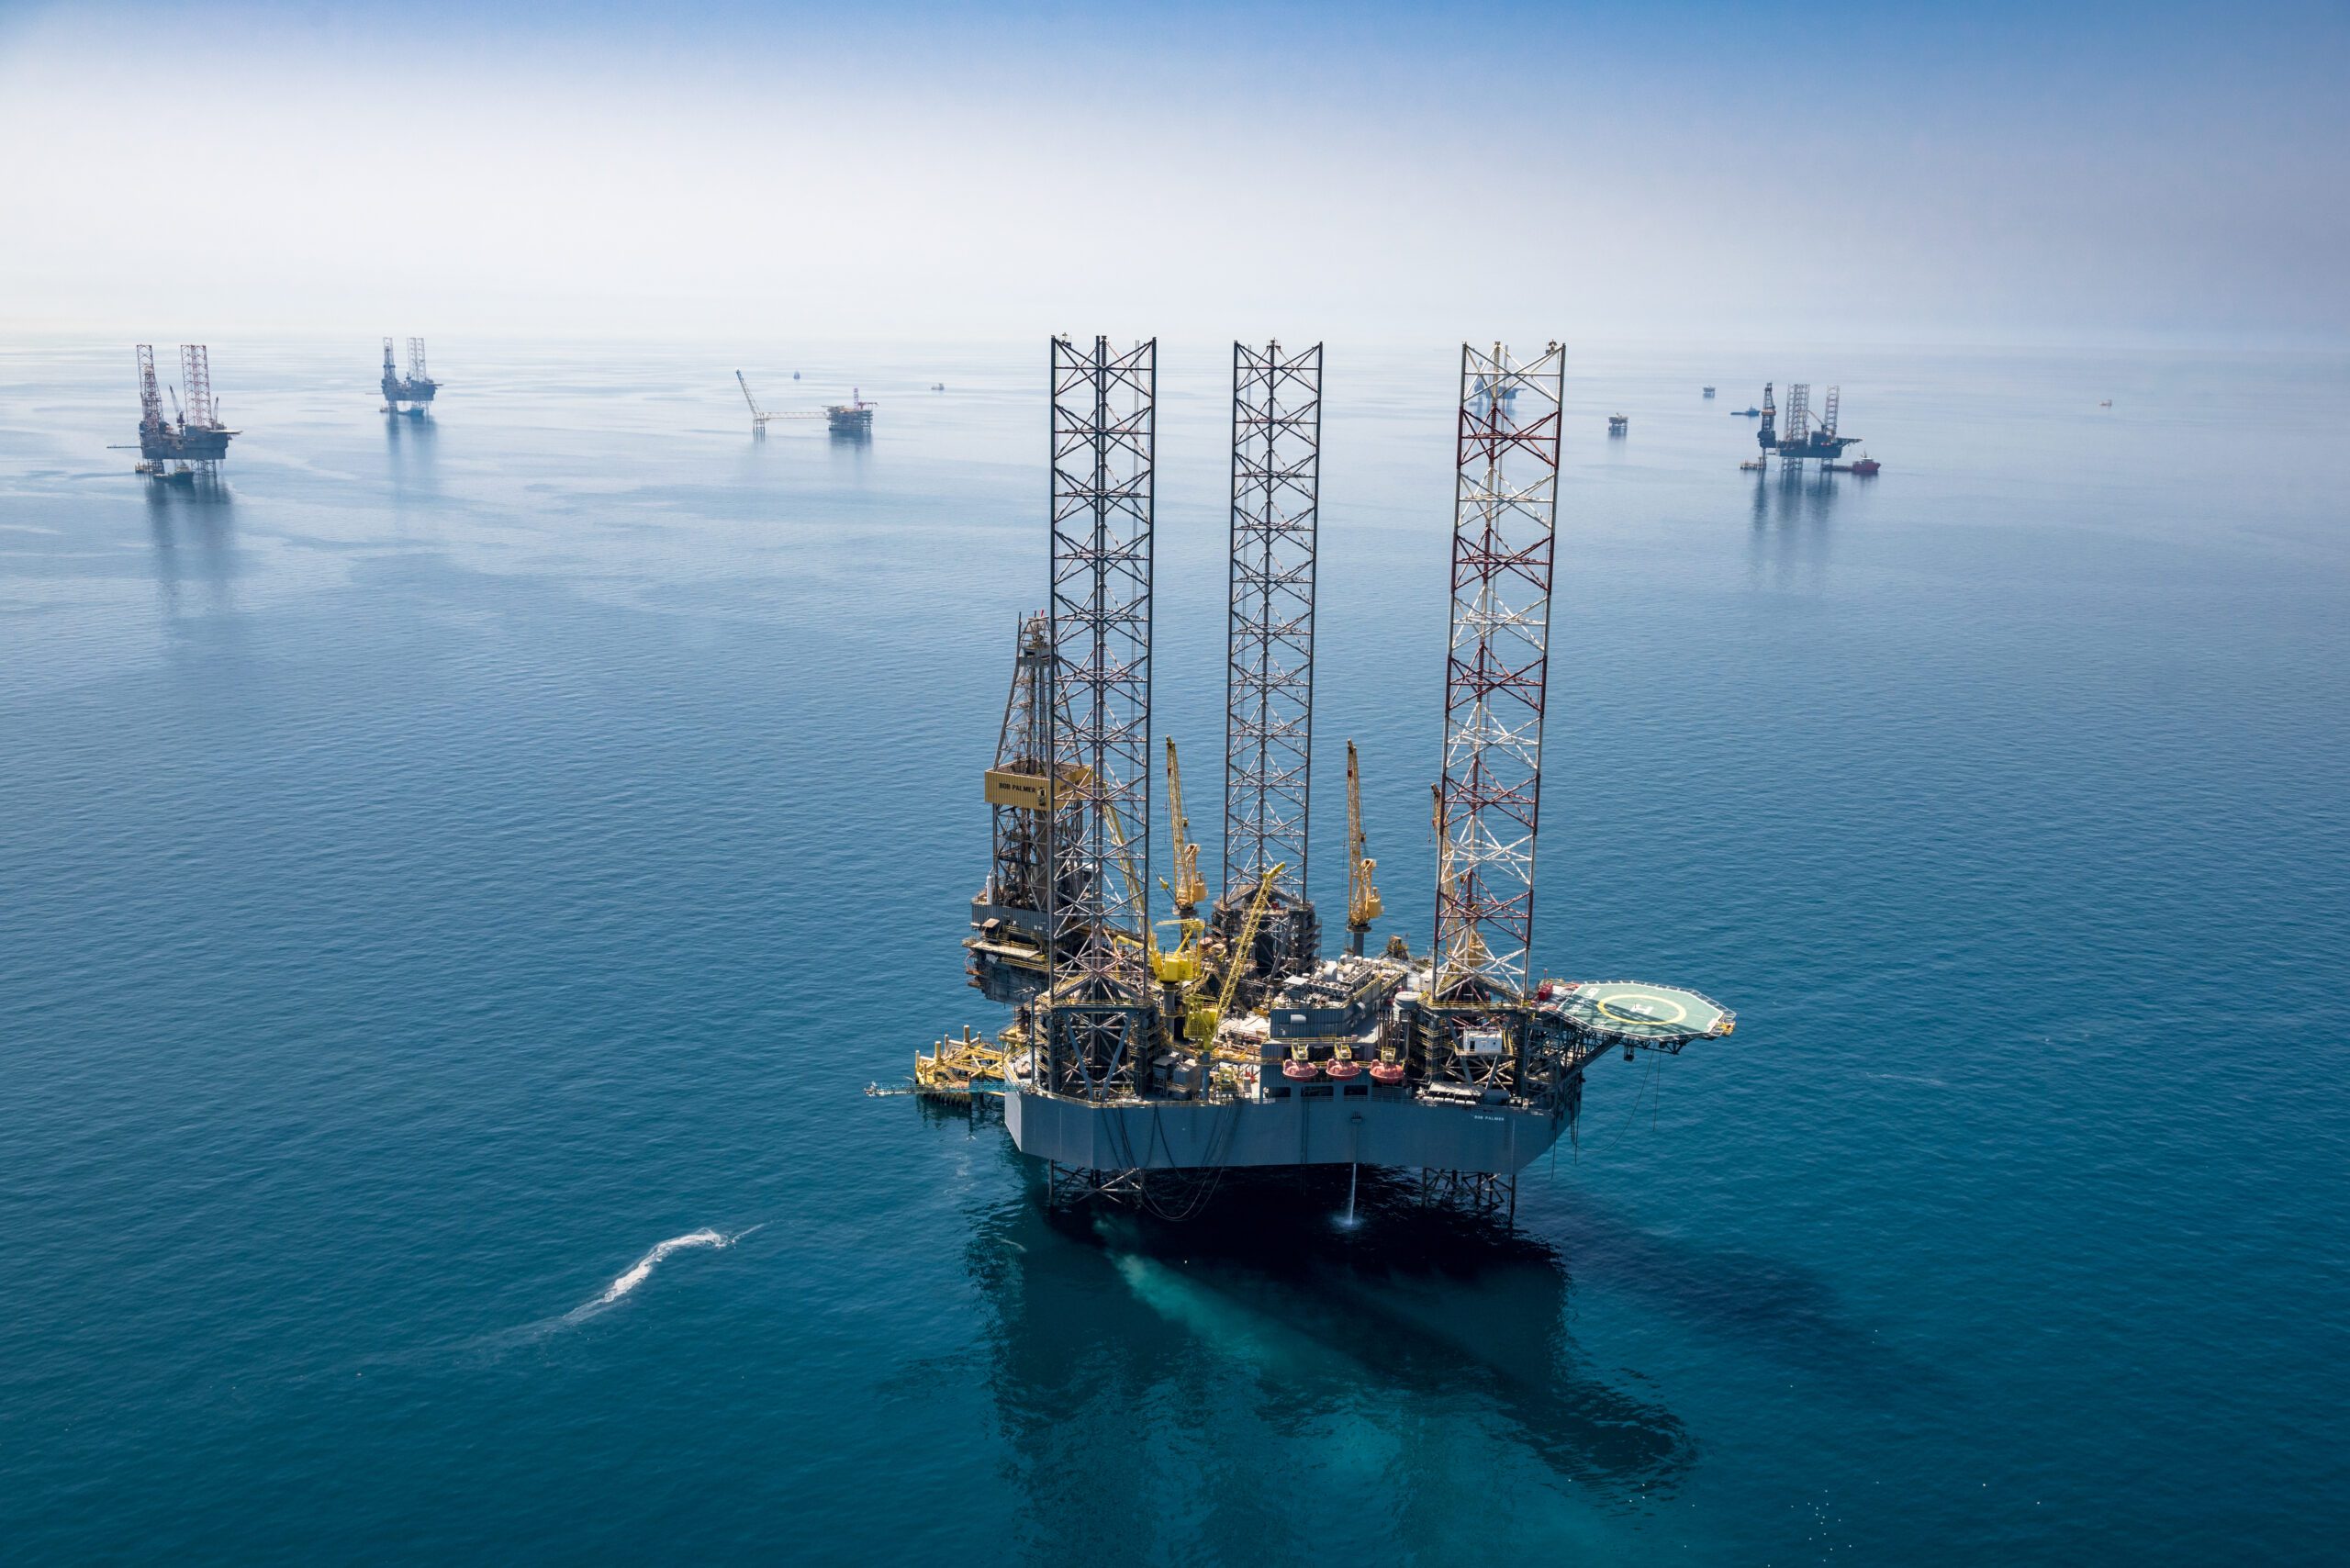 Aramco rigs in the Hasbah oil field. It uses AI for oil exploration and underwater operations